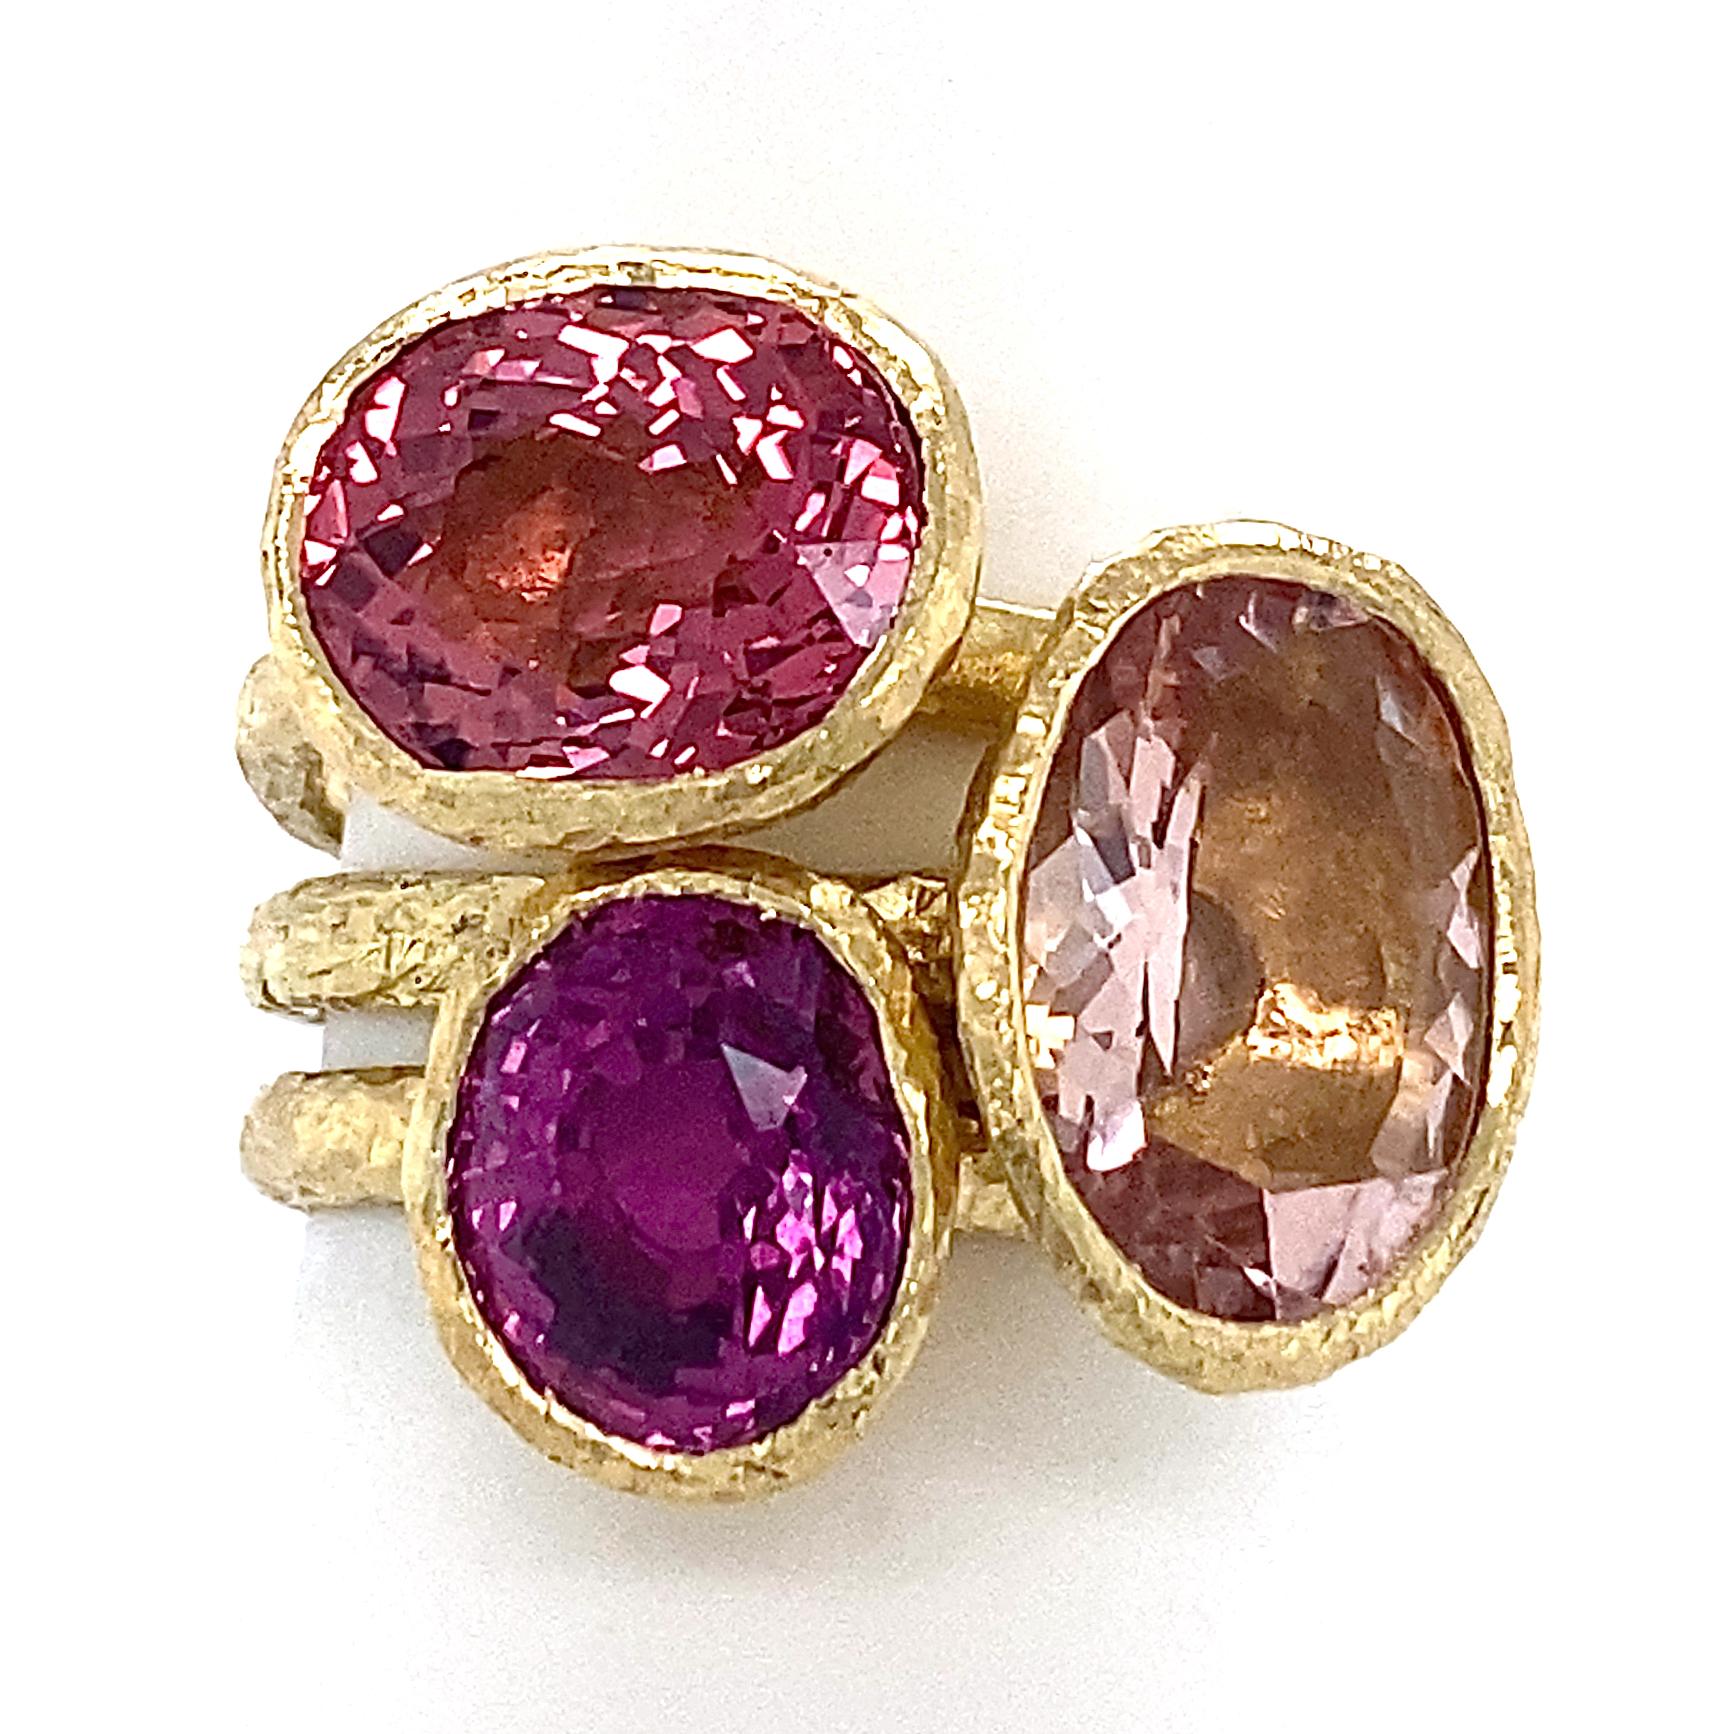 Three different stones offer up three different ways to THINK PINK in this spectacular stacking set by Eytan Brandes.  

All three rings are hand-crafted in rich 18 karat yellow gold by Eytan  and feature a satiny, hammered finish and martini glass